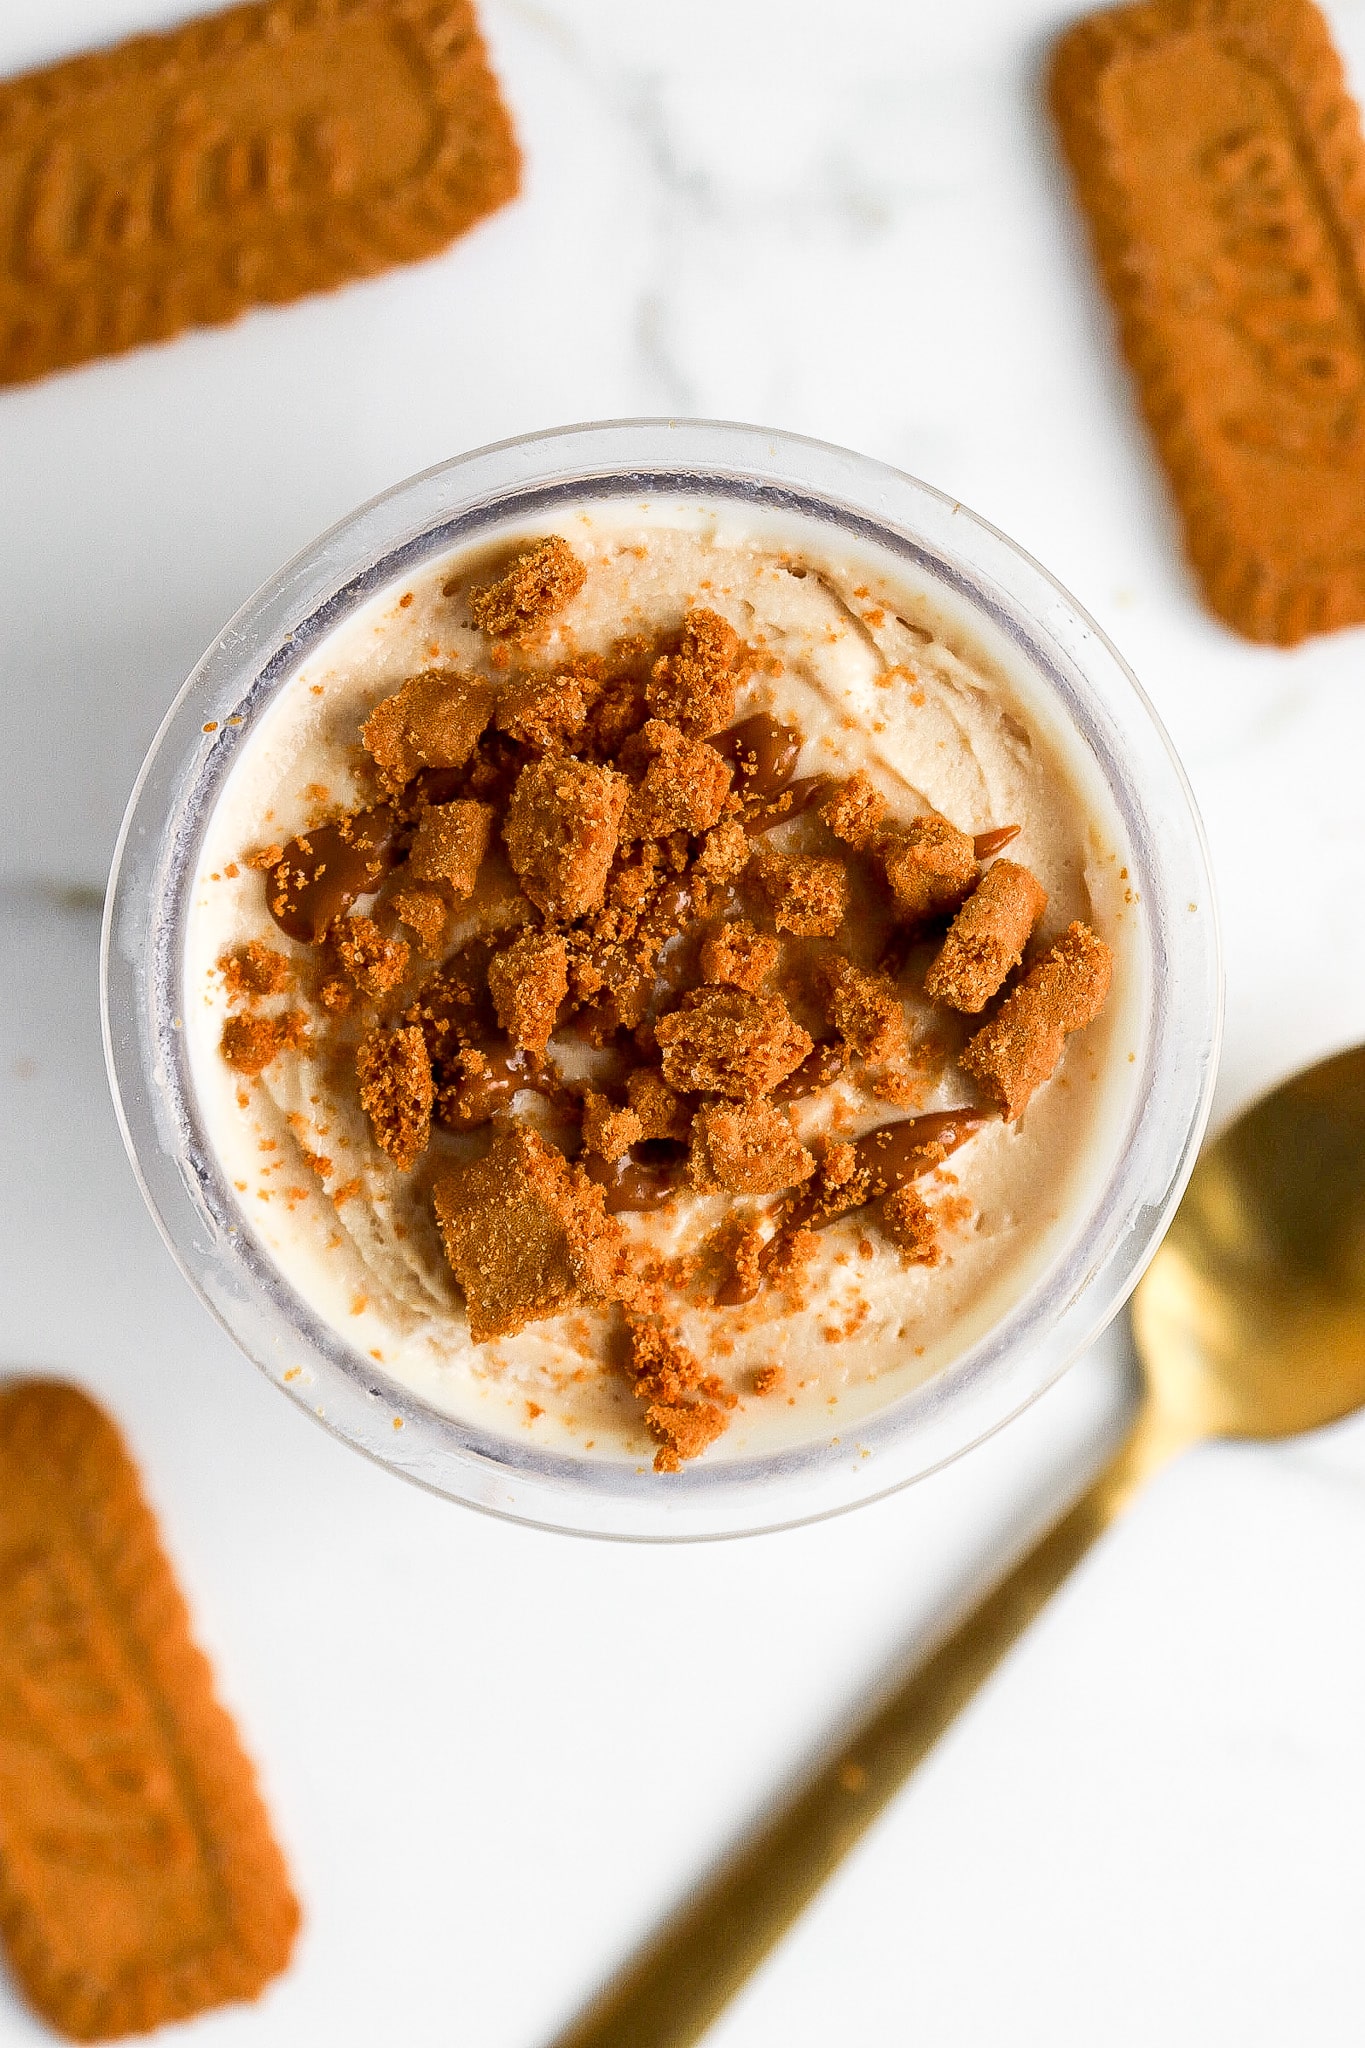 Homemade Lotus Biscoff Spread - Home Cooking Adventure